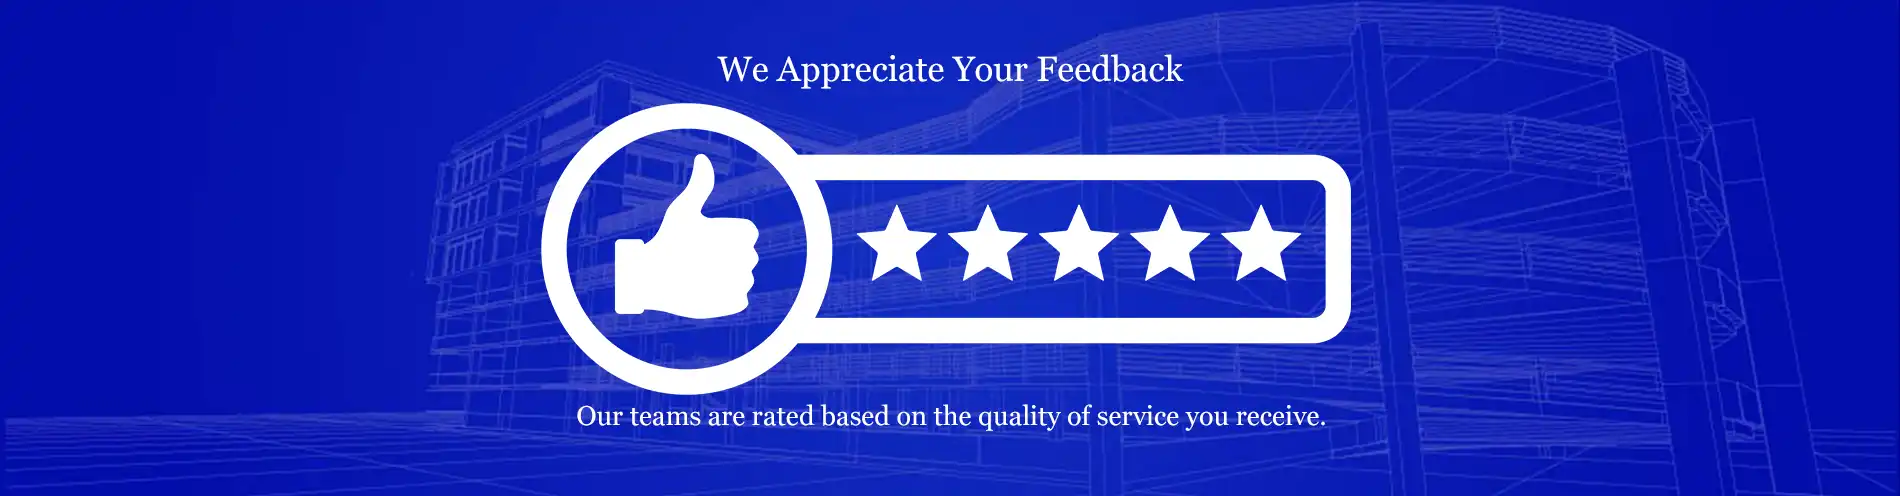 Omega Contracting & Consulting 5 star Review page image